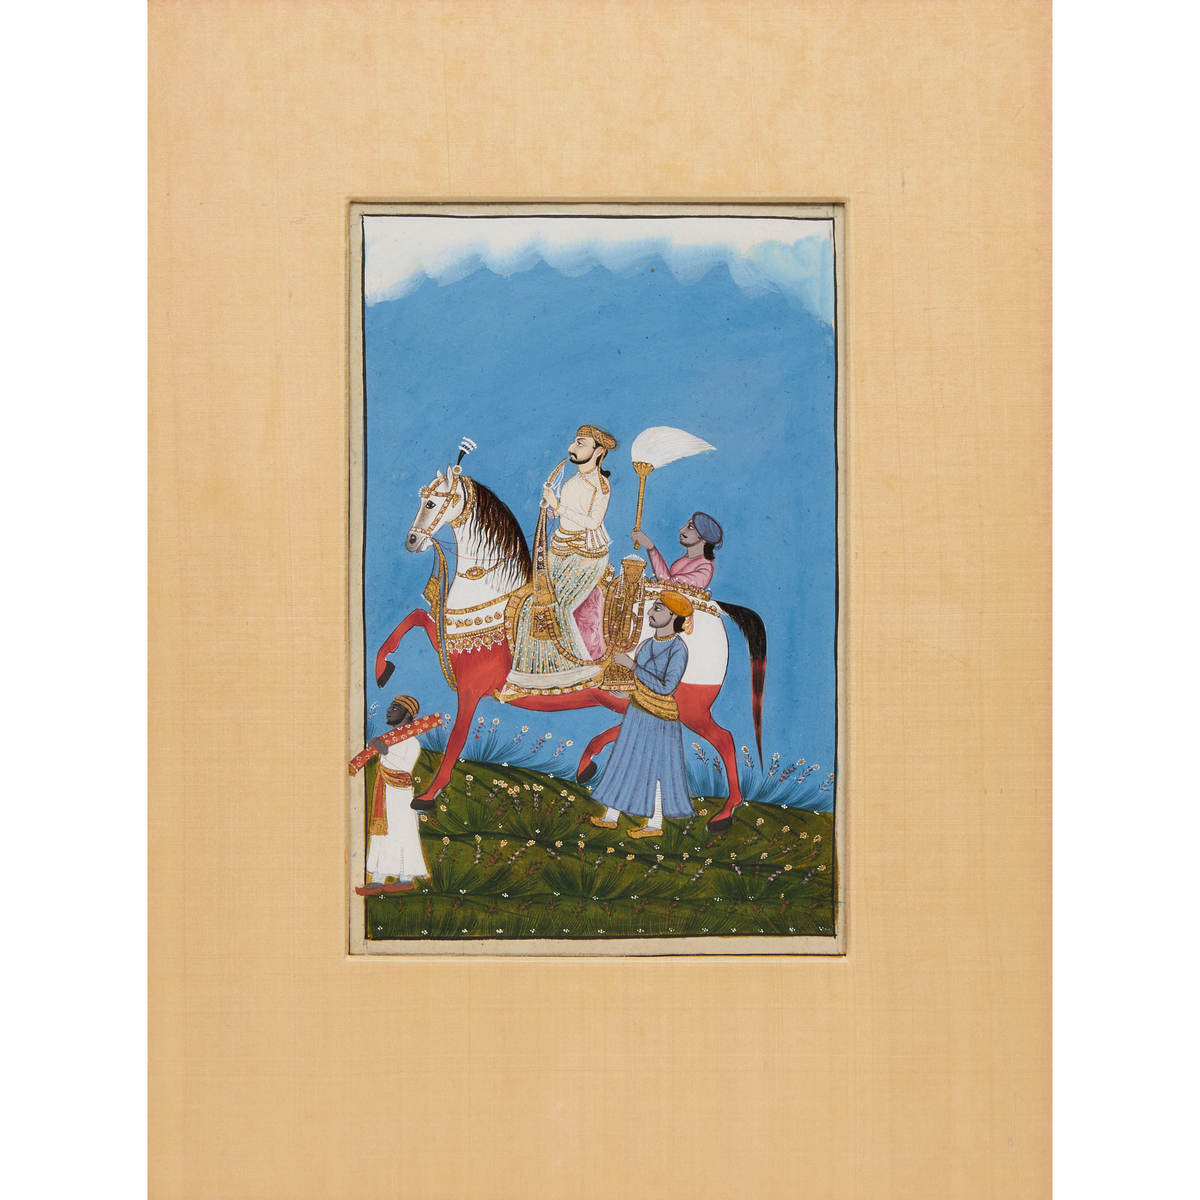 An Equestrian Portrait of a Prince, Rajasthan, North India, 18th/19th Century, sheet 13 x 8.7 in — 3 - Image 2 of 4